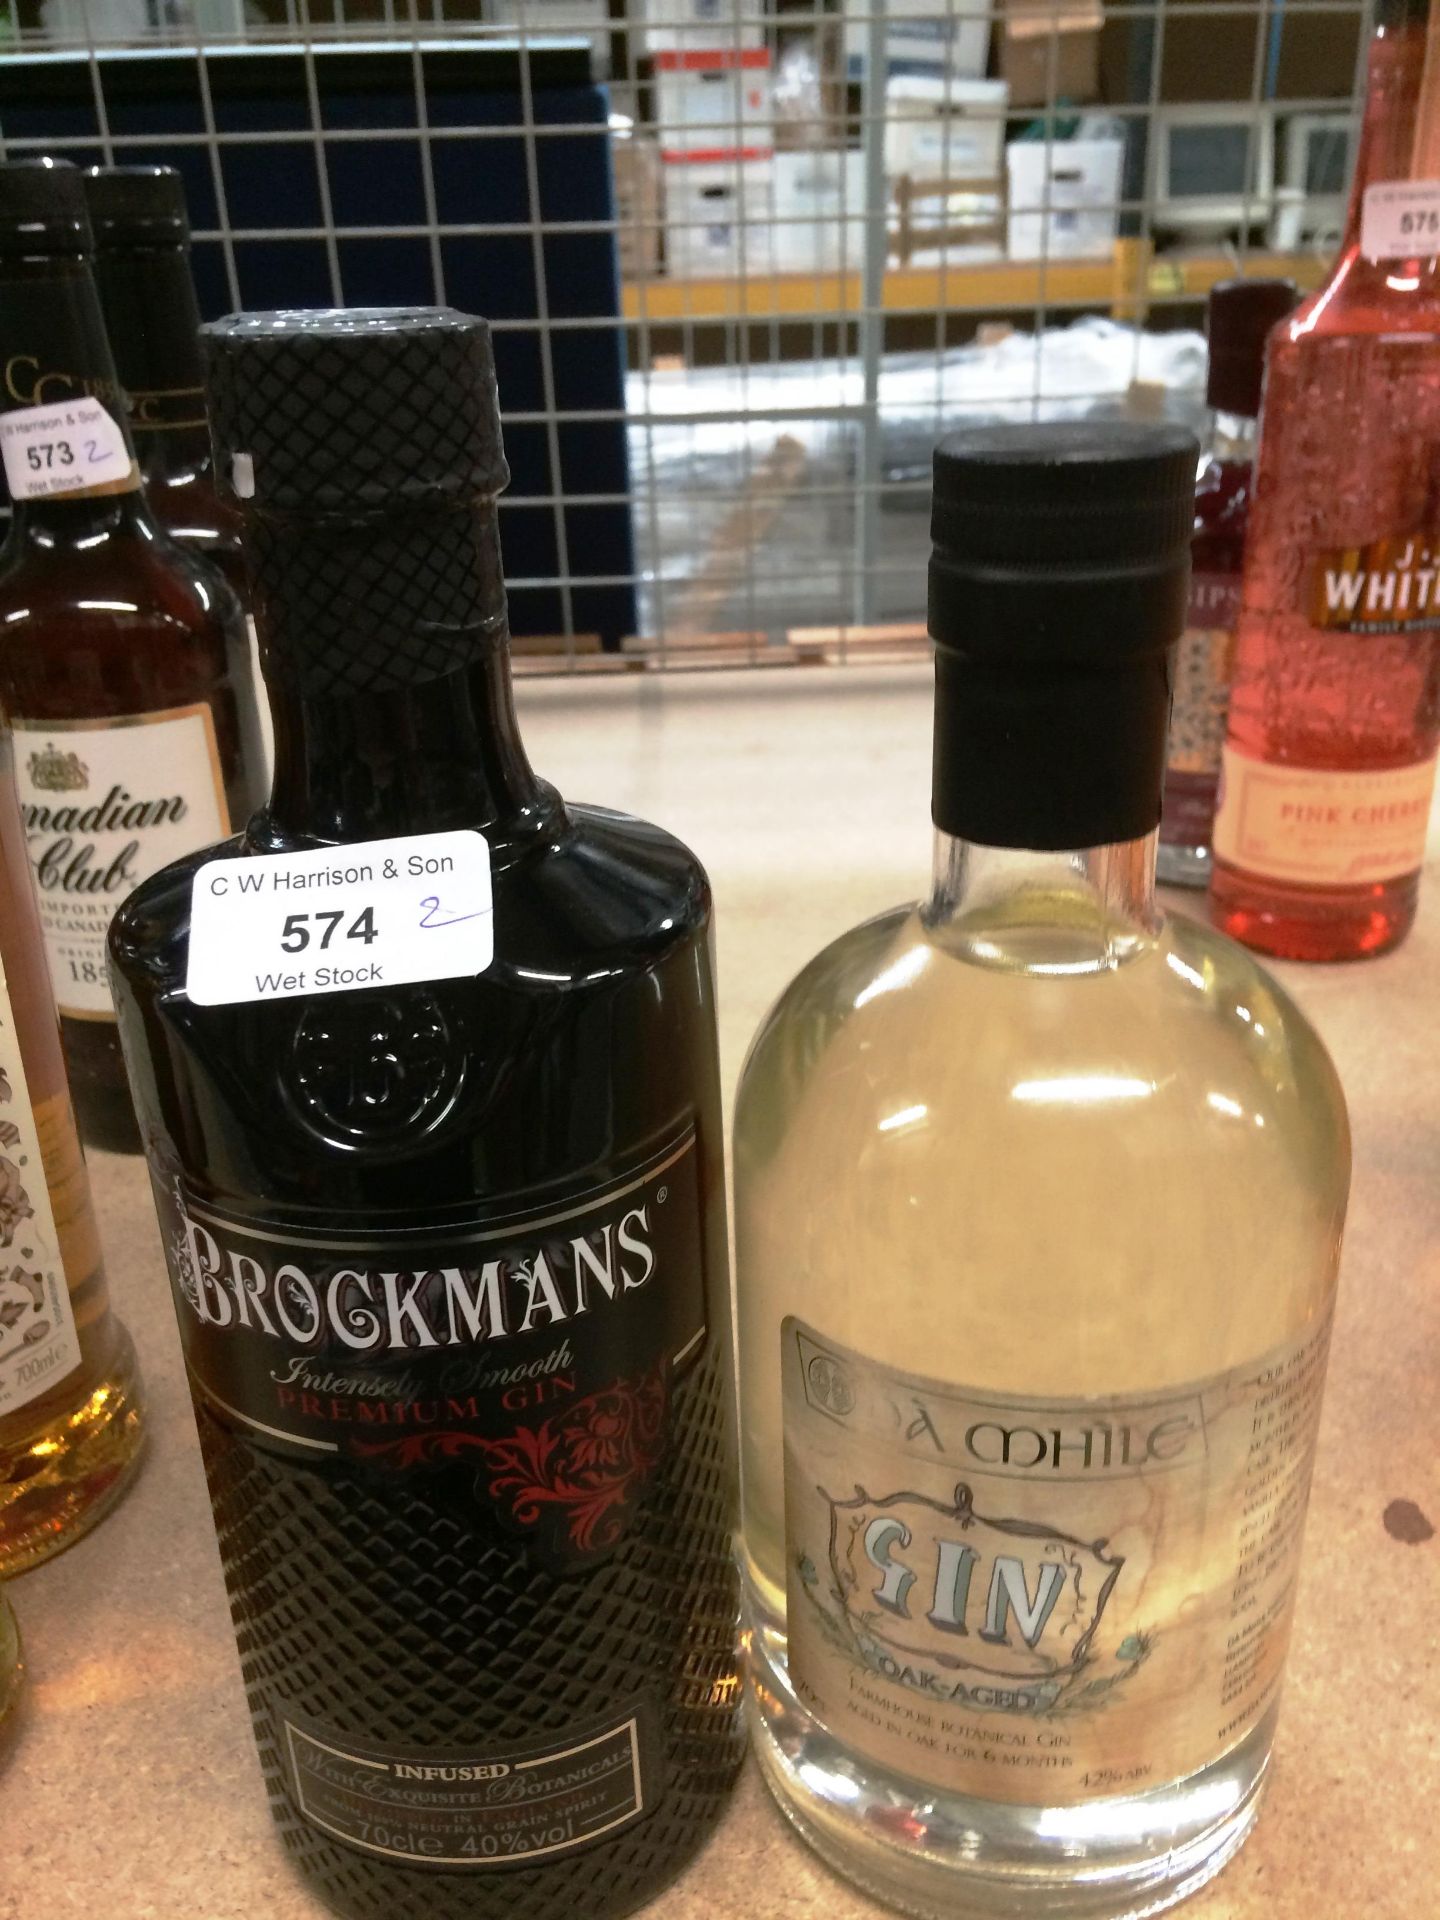 2 x items - 1 x 70cl bottle of Da Mhile Oak Aged Gin and 1 x 70cl bottle of Brockman's Gin